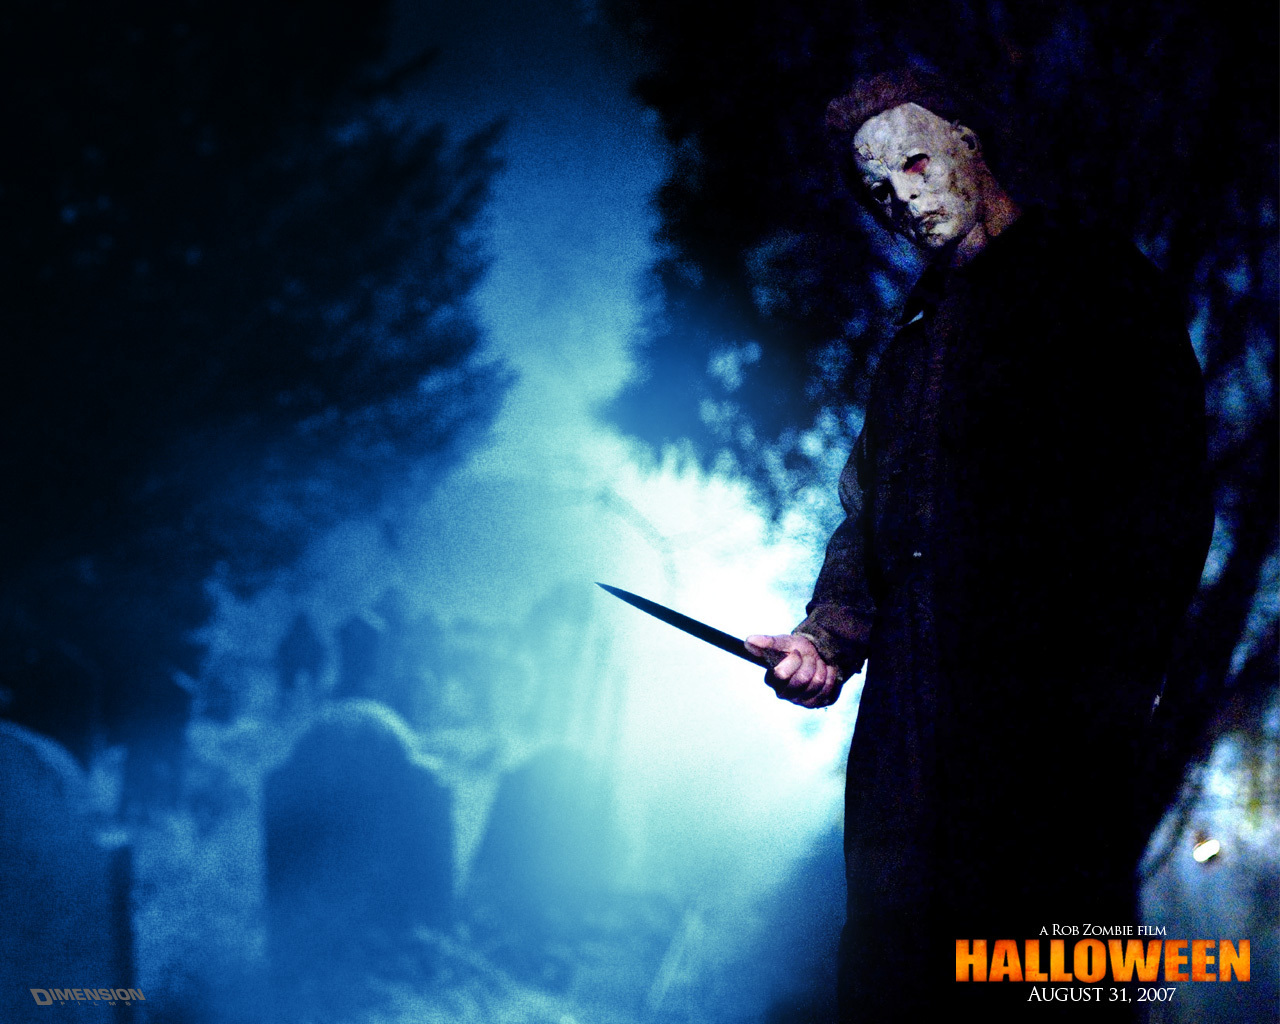 Michael Myers Halloween 2007 Images amp Pictures   Becuo